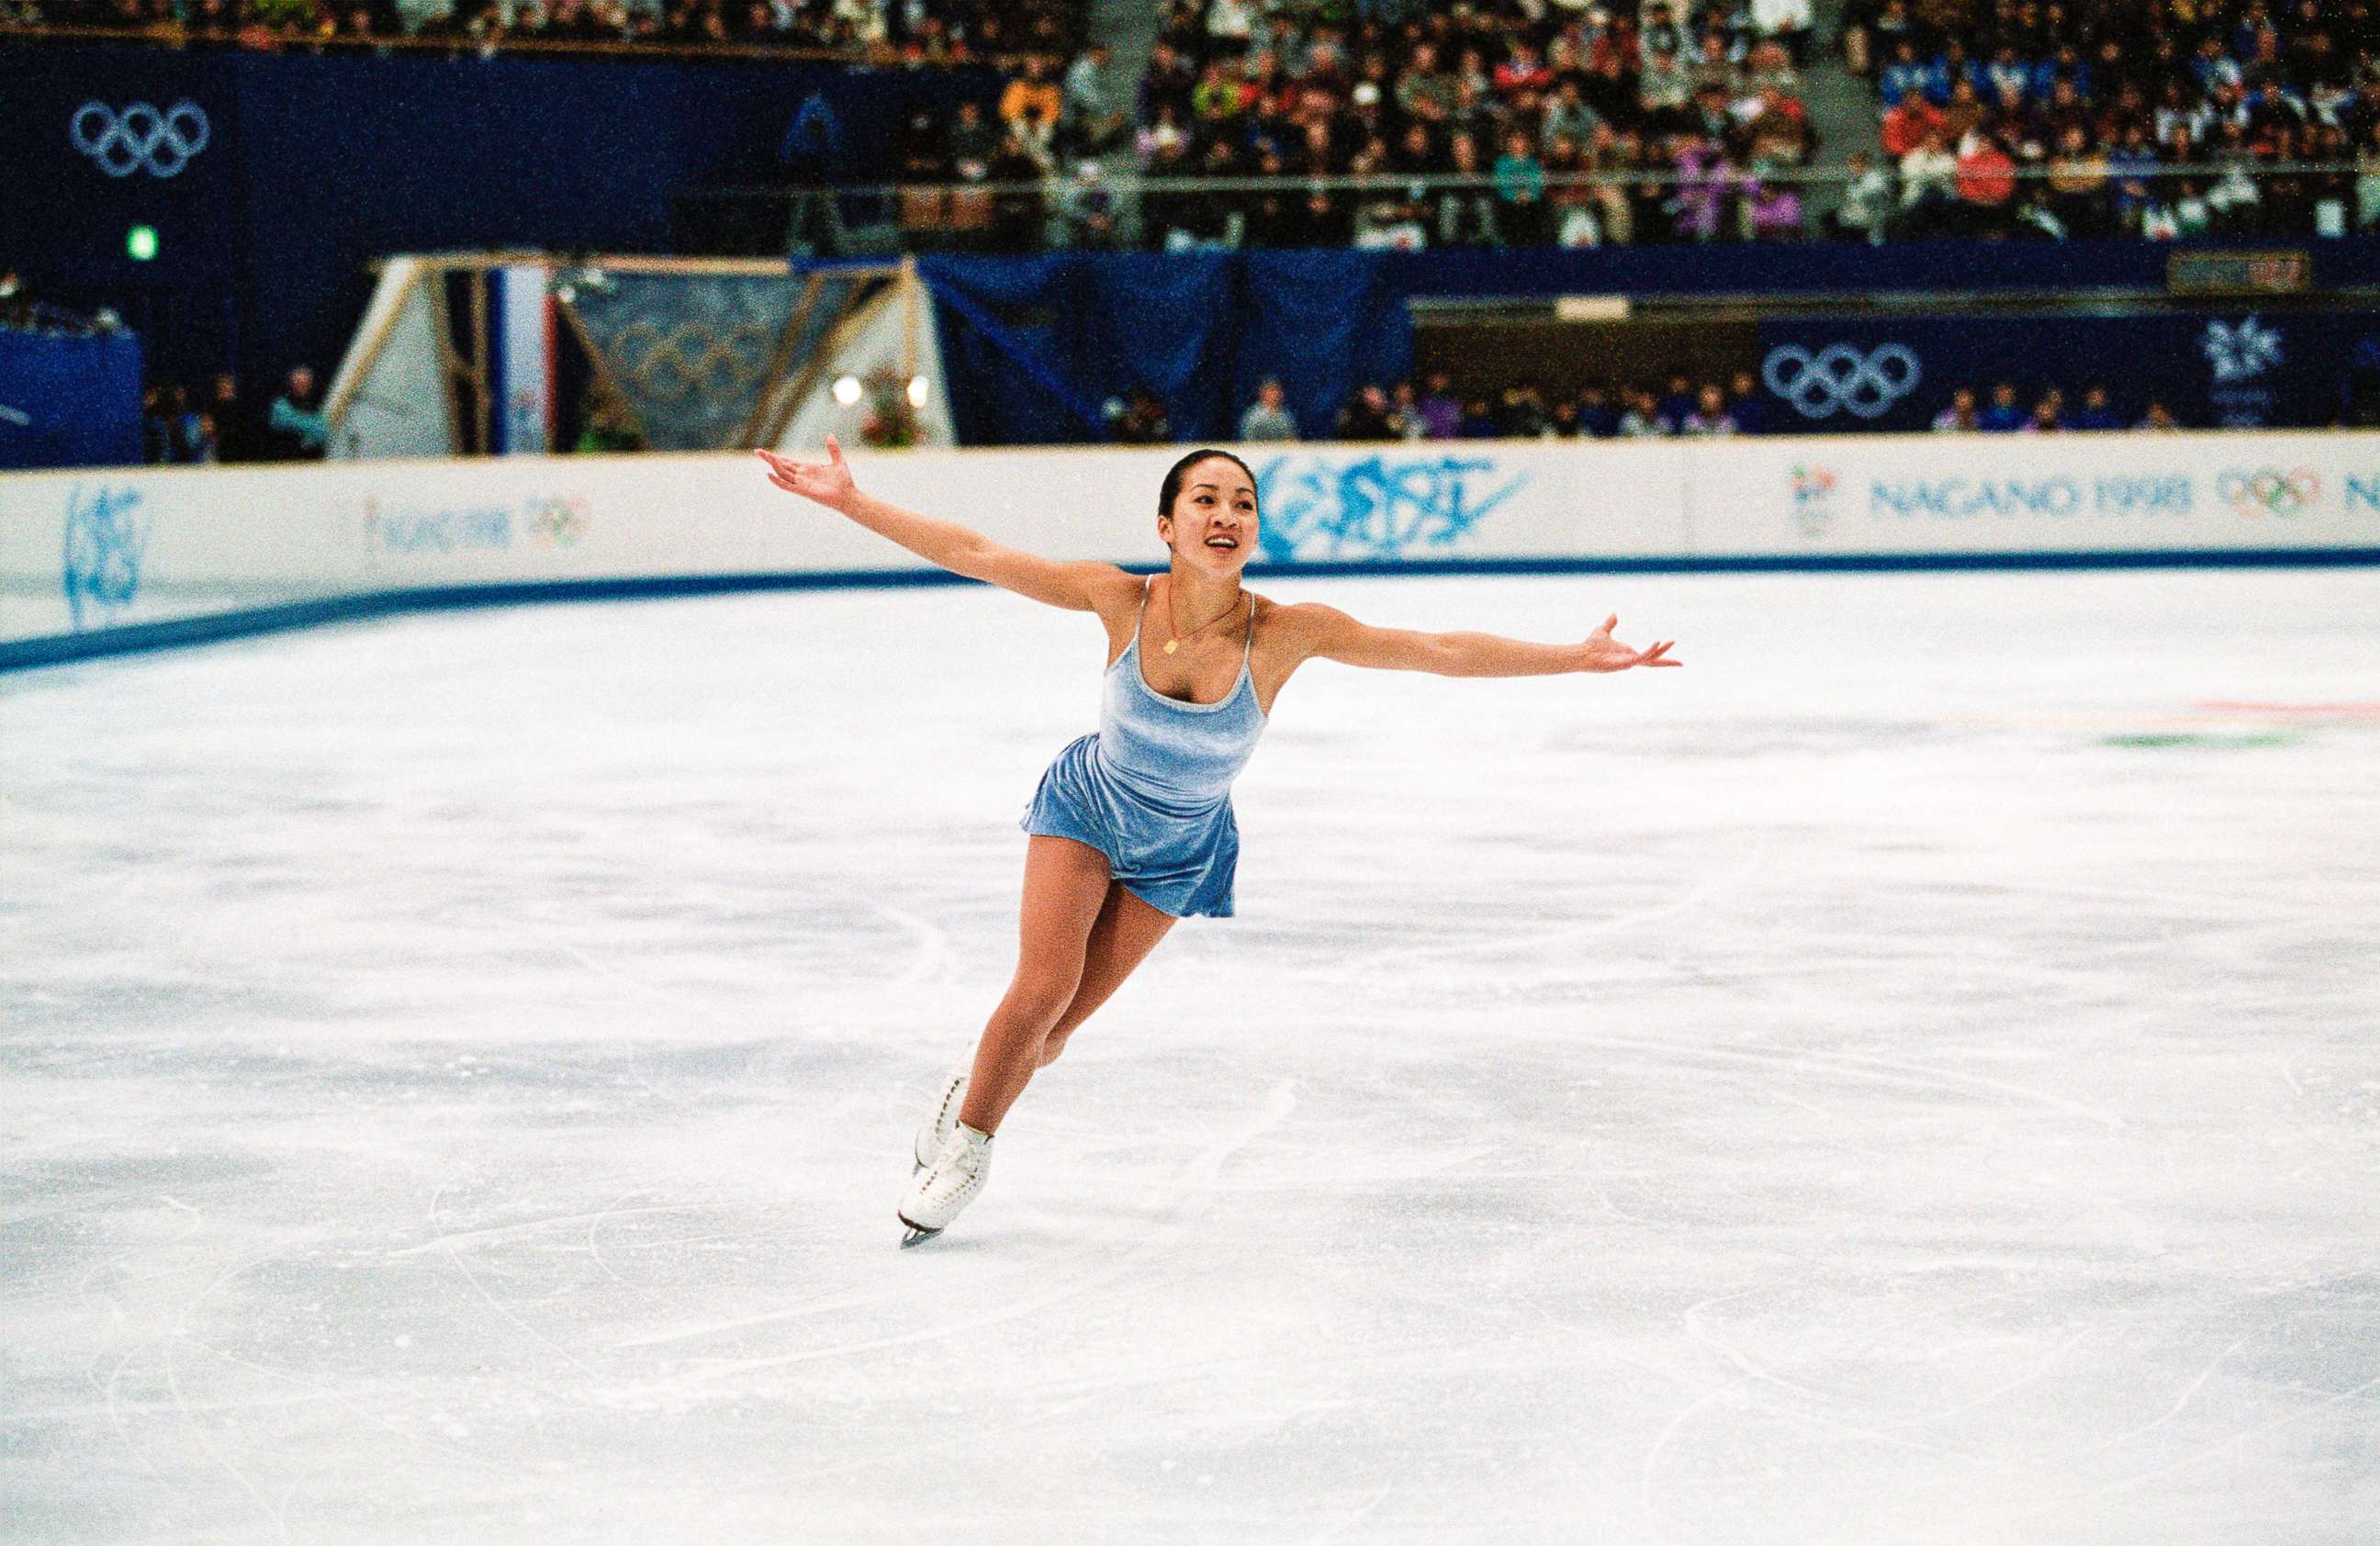 PHOTO: American figure skater Michelle Kwan performs during the women's figure skating long program at The 1998 Winter Olympics in Nagano, Japan on Feb. 20, 1998. Kwan won a silver medal in 1998 and a bronze medal at the 2002 Winter Olympics. 